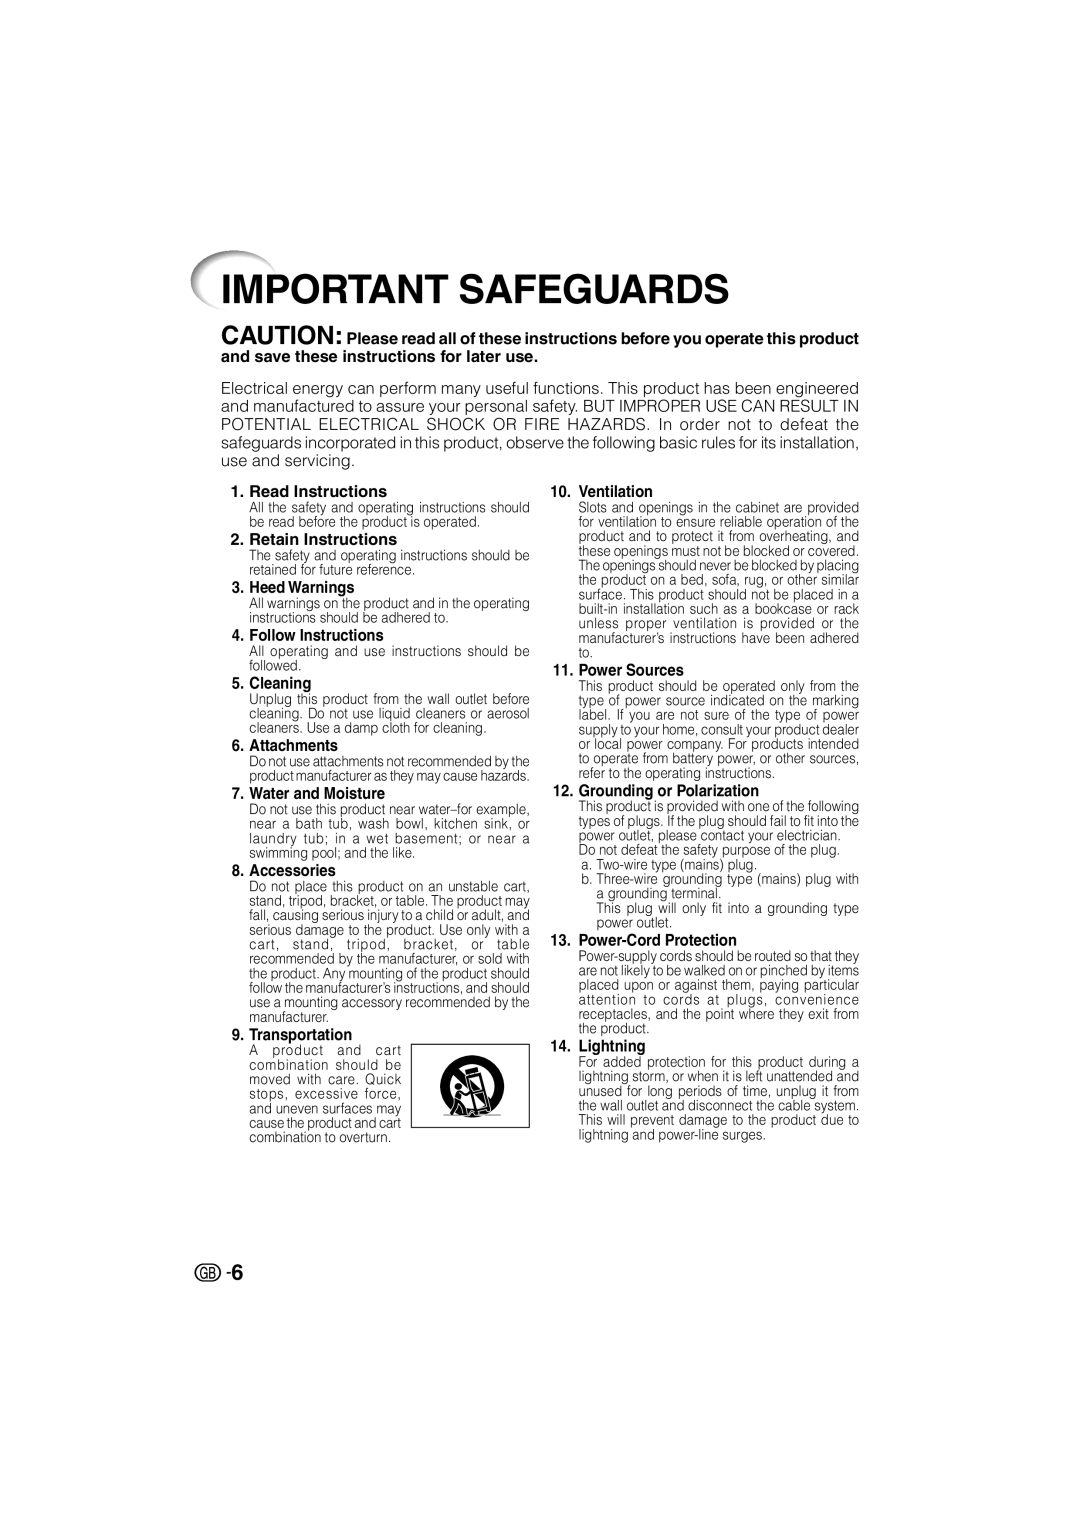 Sharp XV-Z3000 Important Safeguards, Read Instructions, Retain Instructions, Heed Warnings, Follow Instructions, Cleaning 